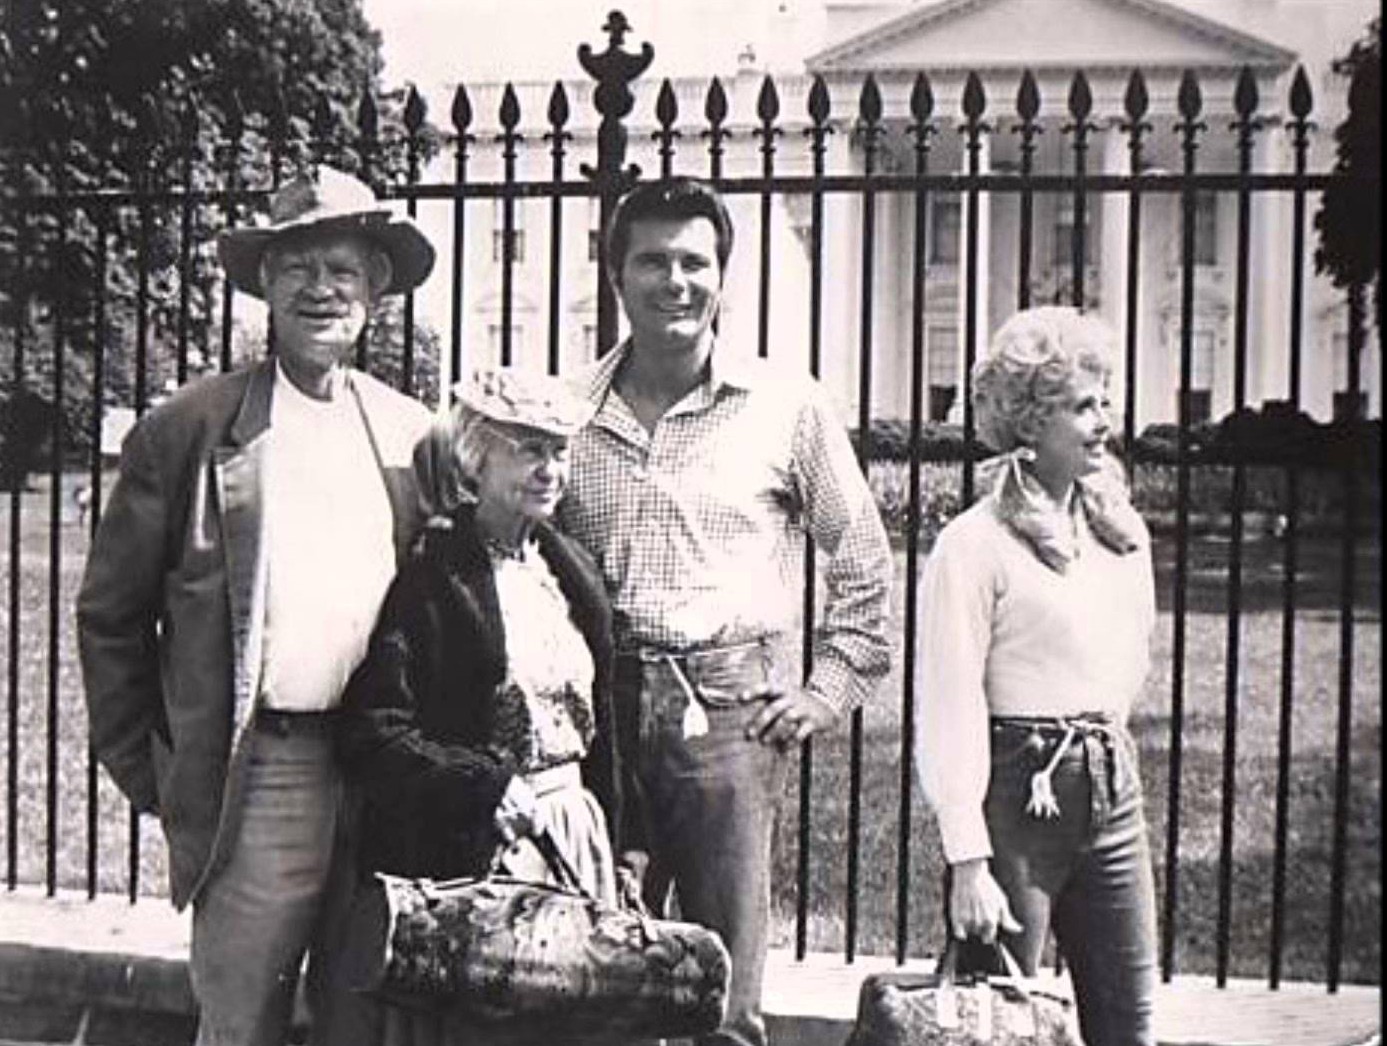 Jed Clampett and family